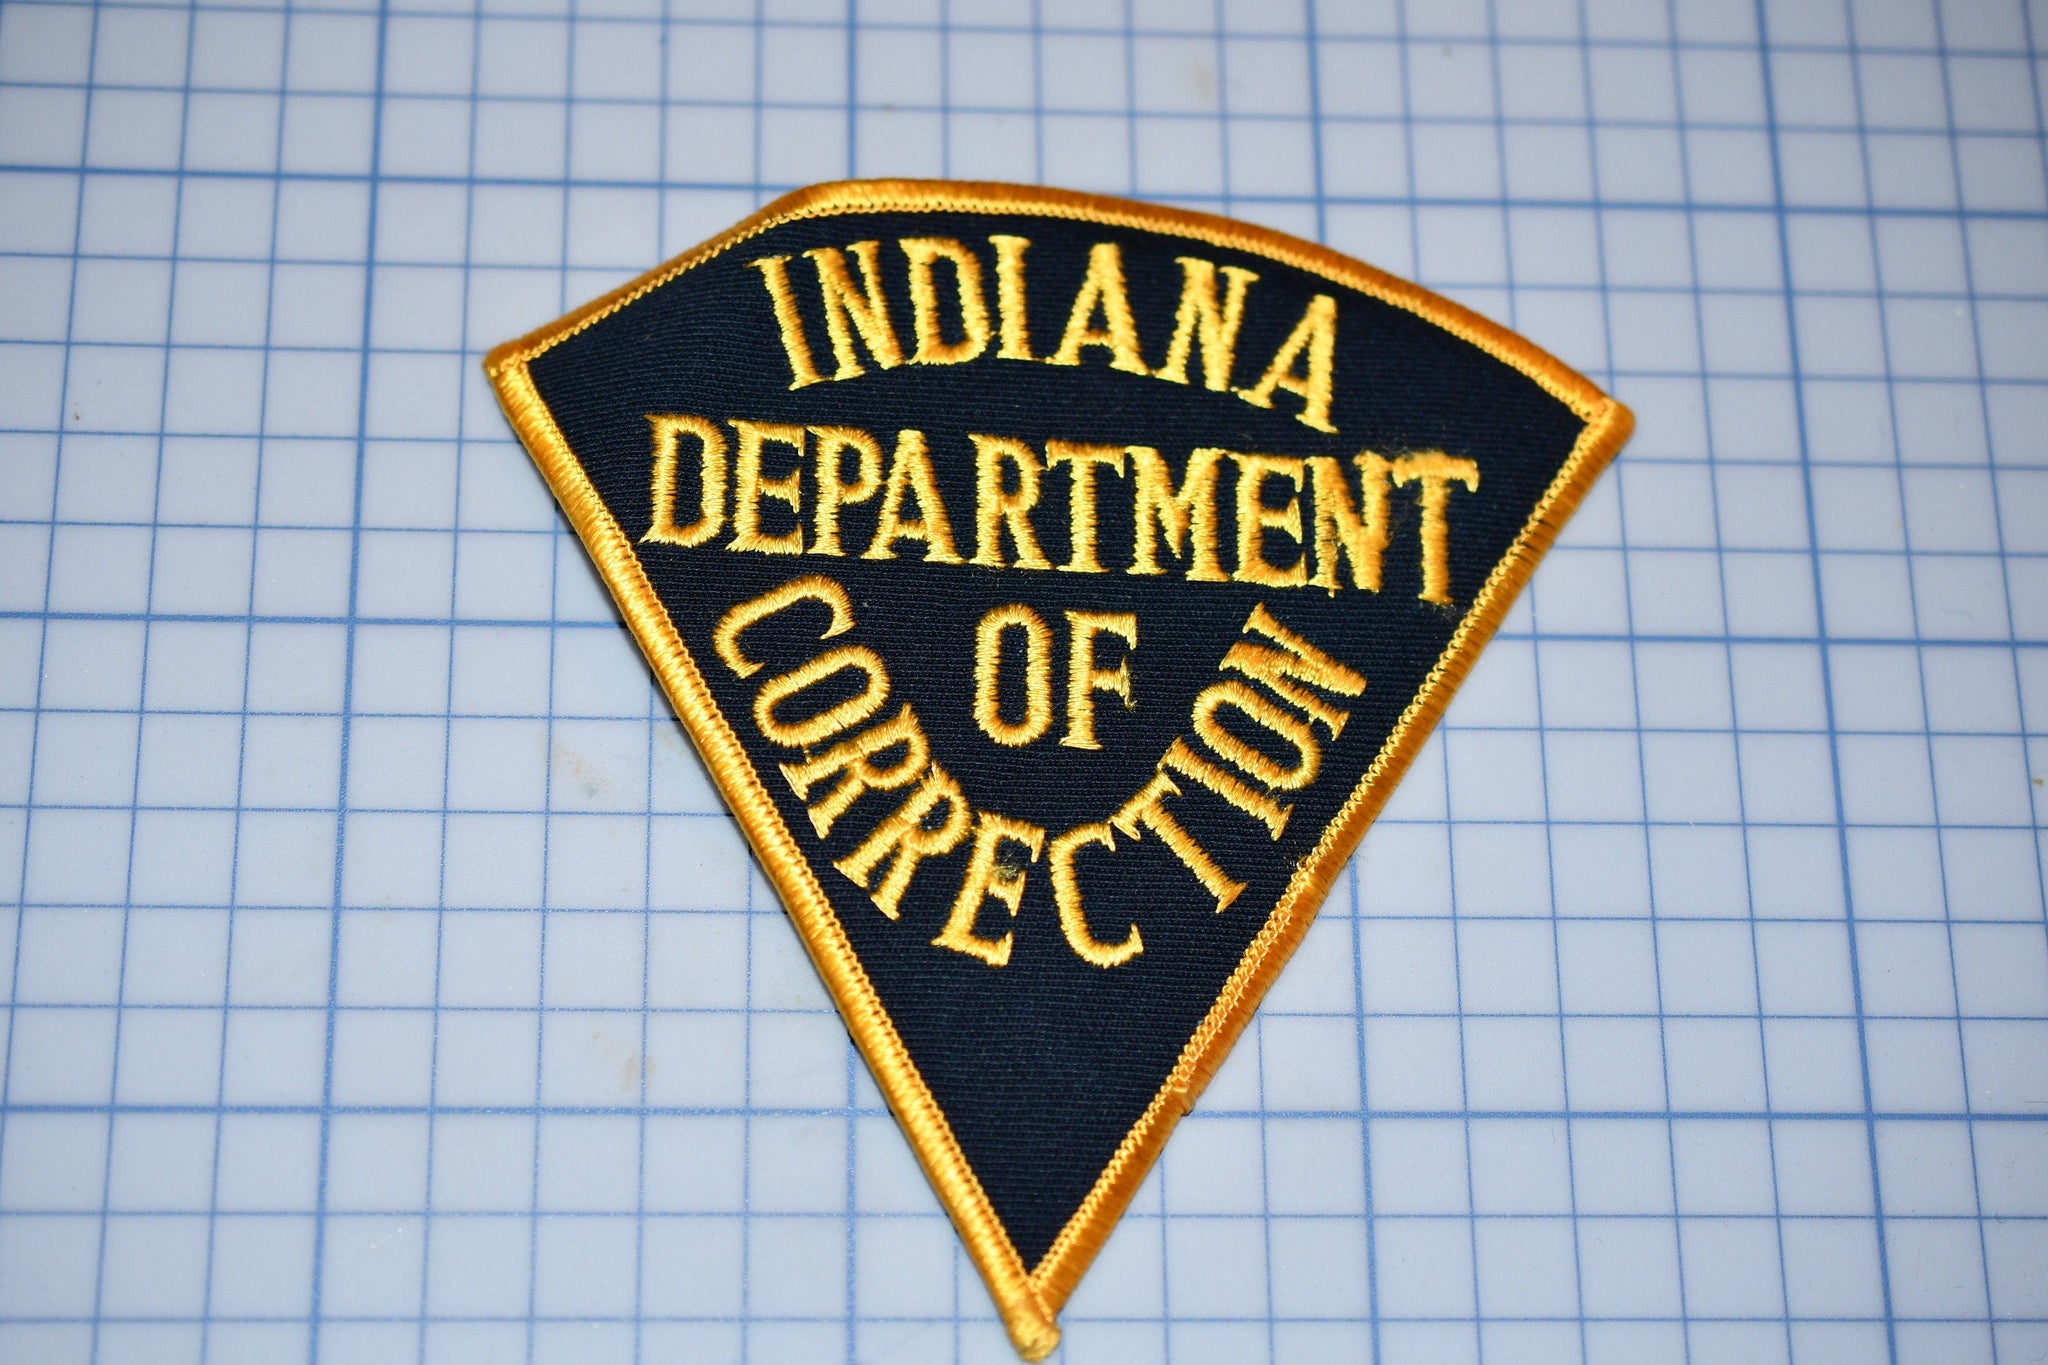 Indiana Department Of Correction Patch (S3-280)